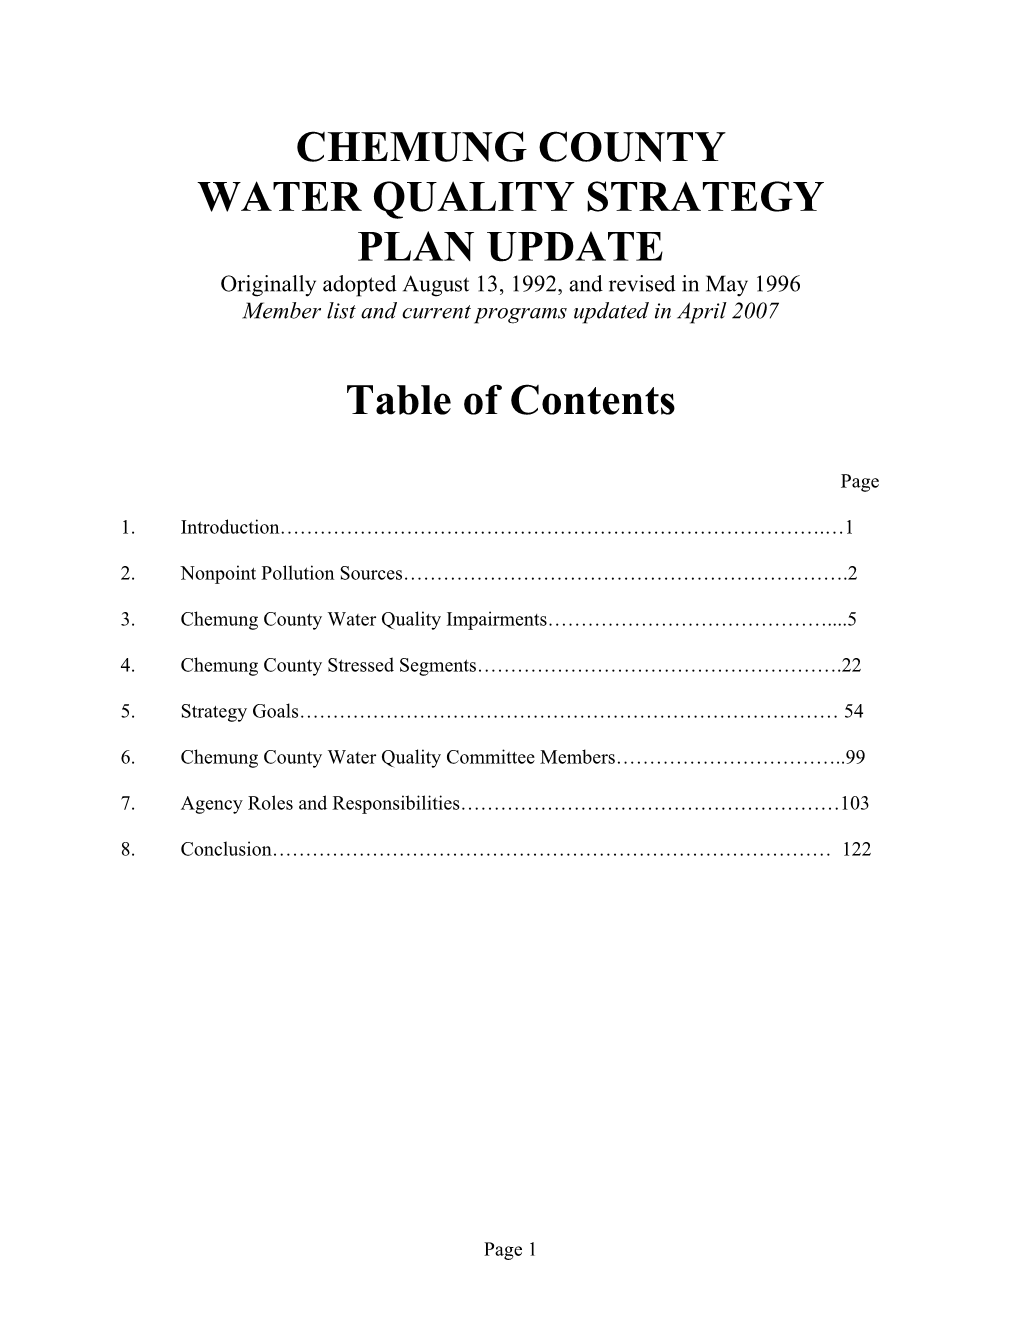 CHEMUNG COUNTY WATER QUALITY STRATEGY PLAN UPDATE Originally Adopted August 13, 1992, and Revised in May 1996 Member List and Current Programs Updated in April 2007